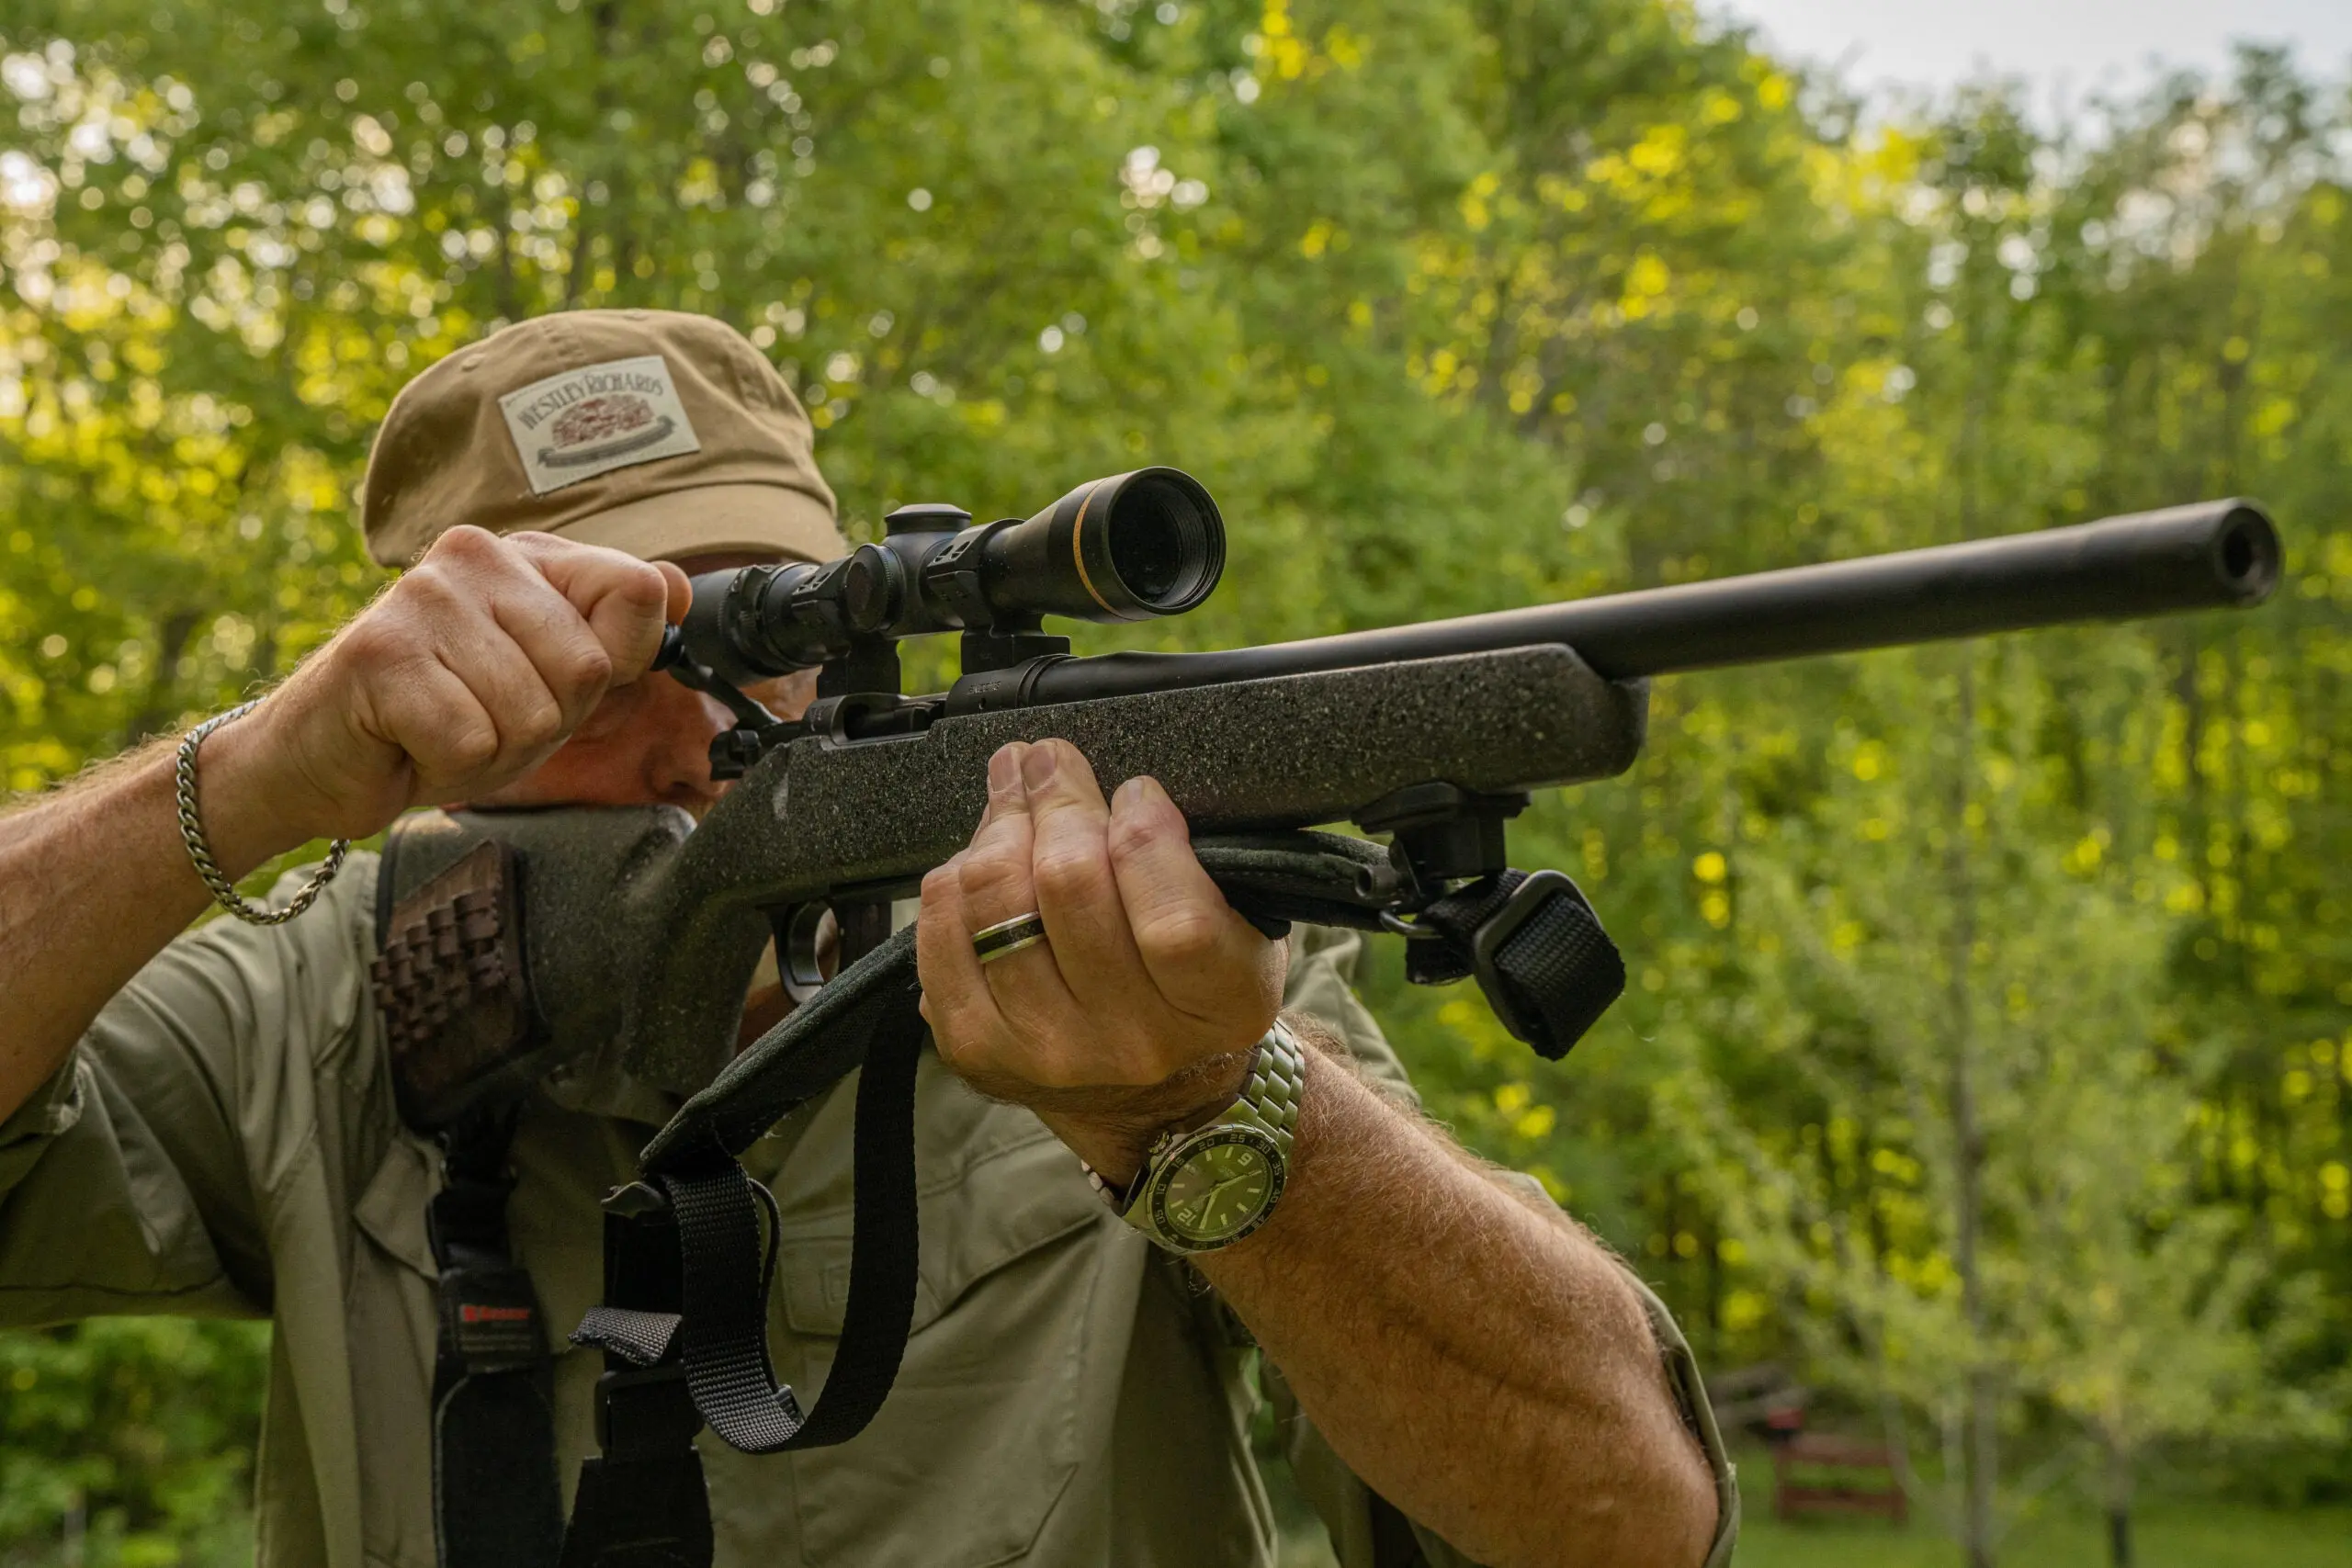 A shooter works the bolt of a hunting rifle on the range with green foliage in background